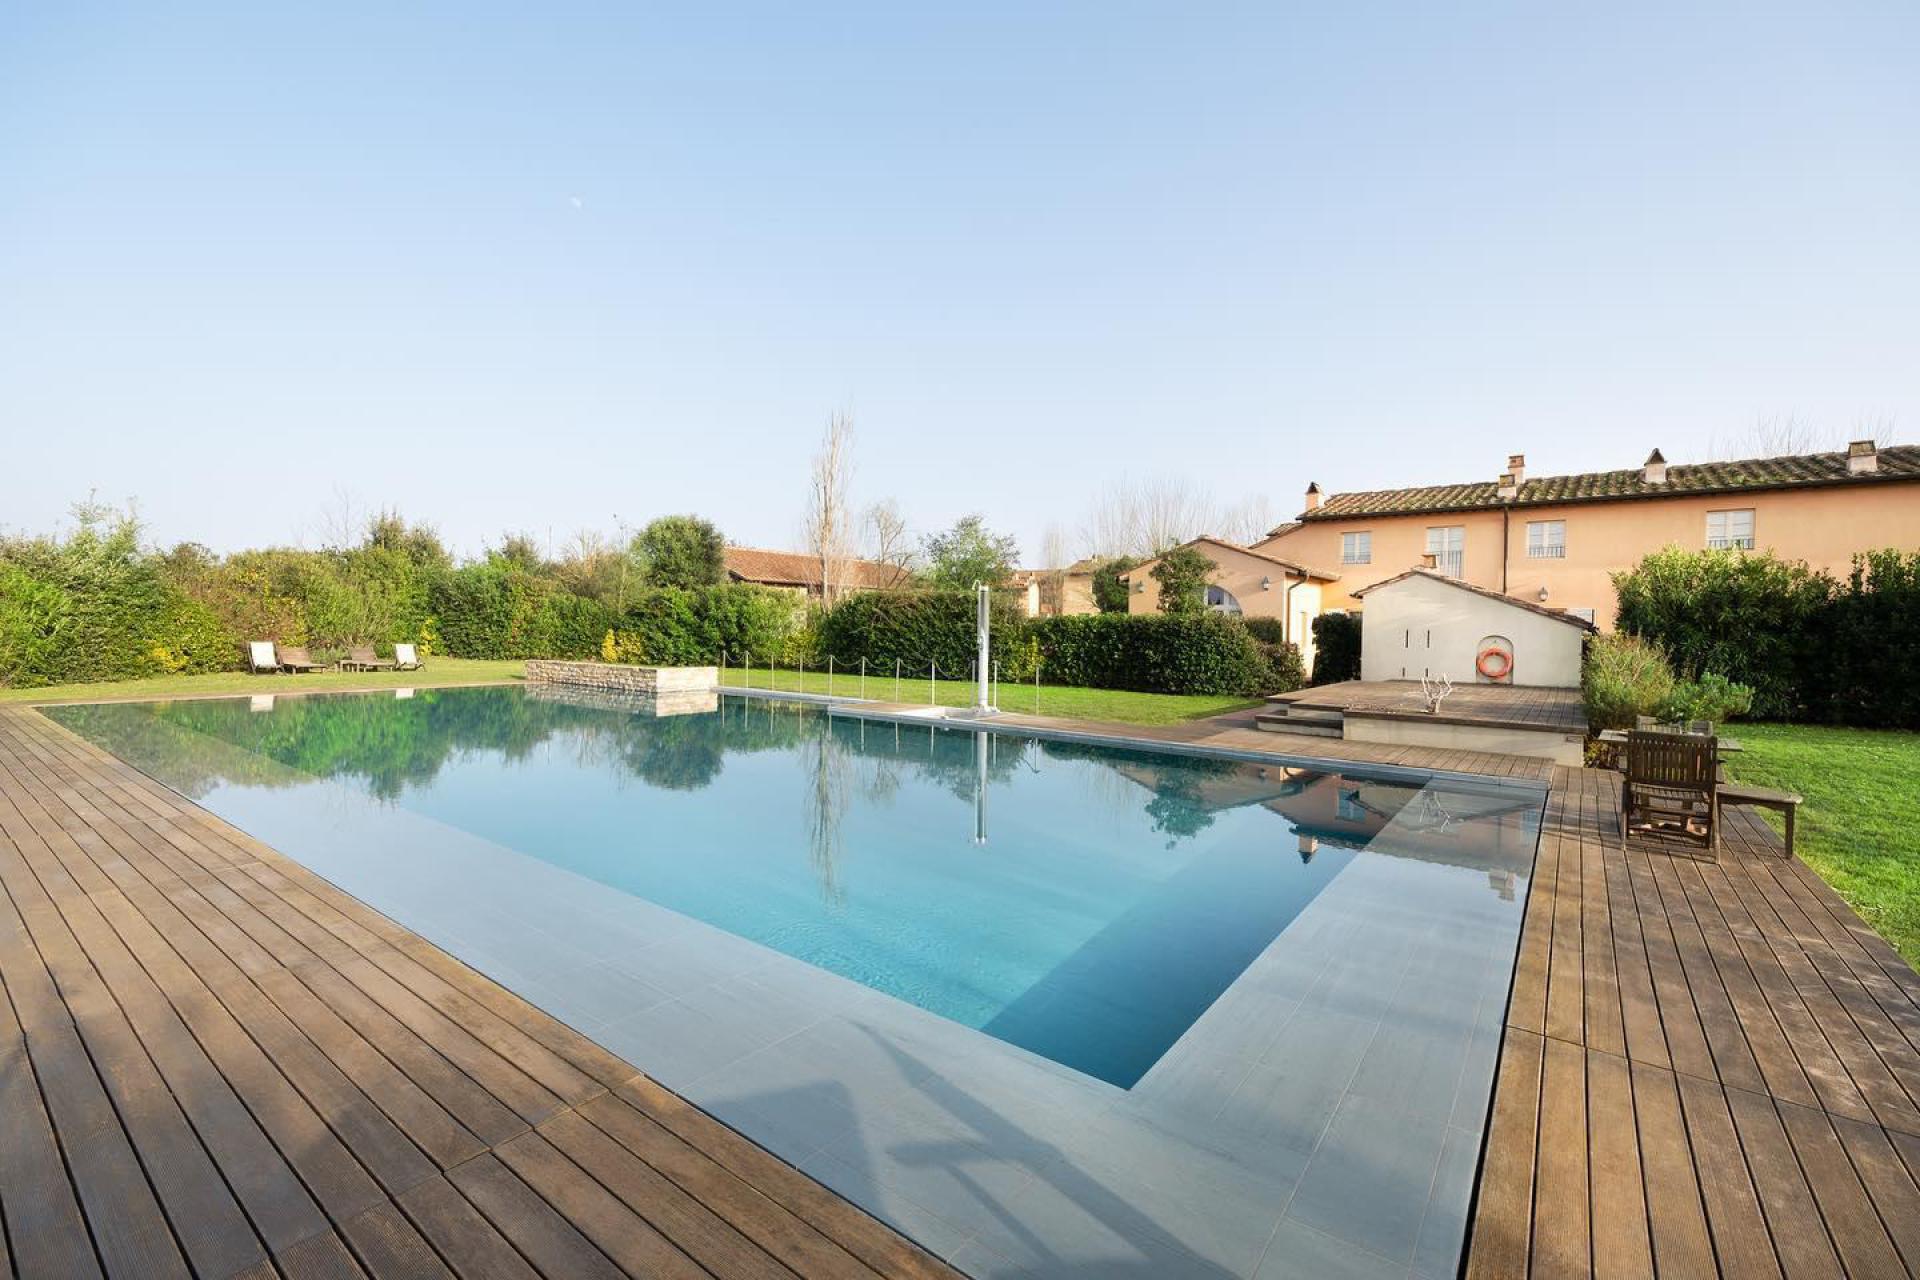 Family friendly residence in Tuscany close to the beach